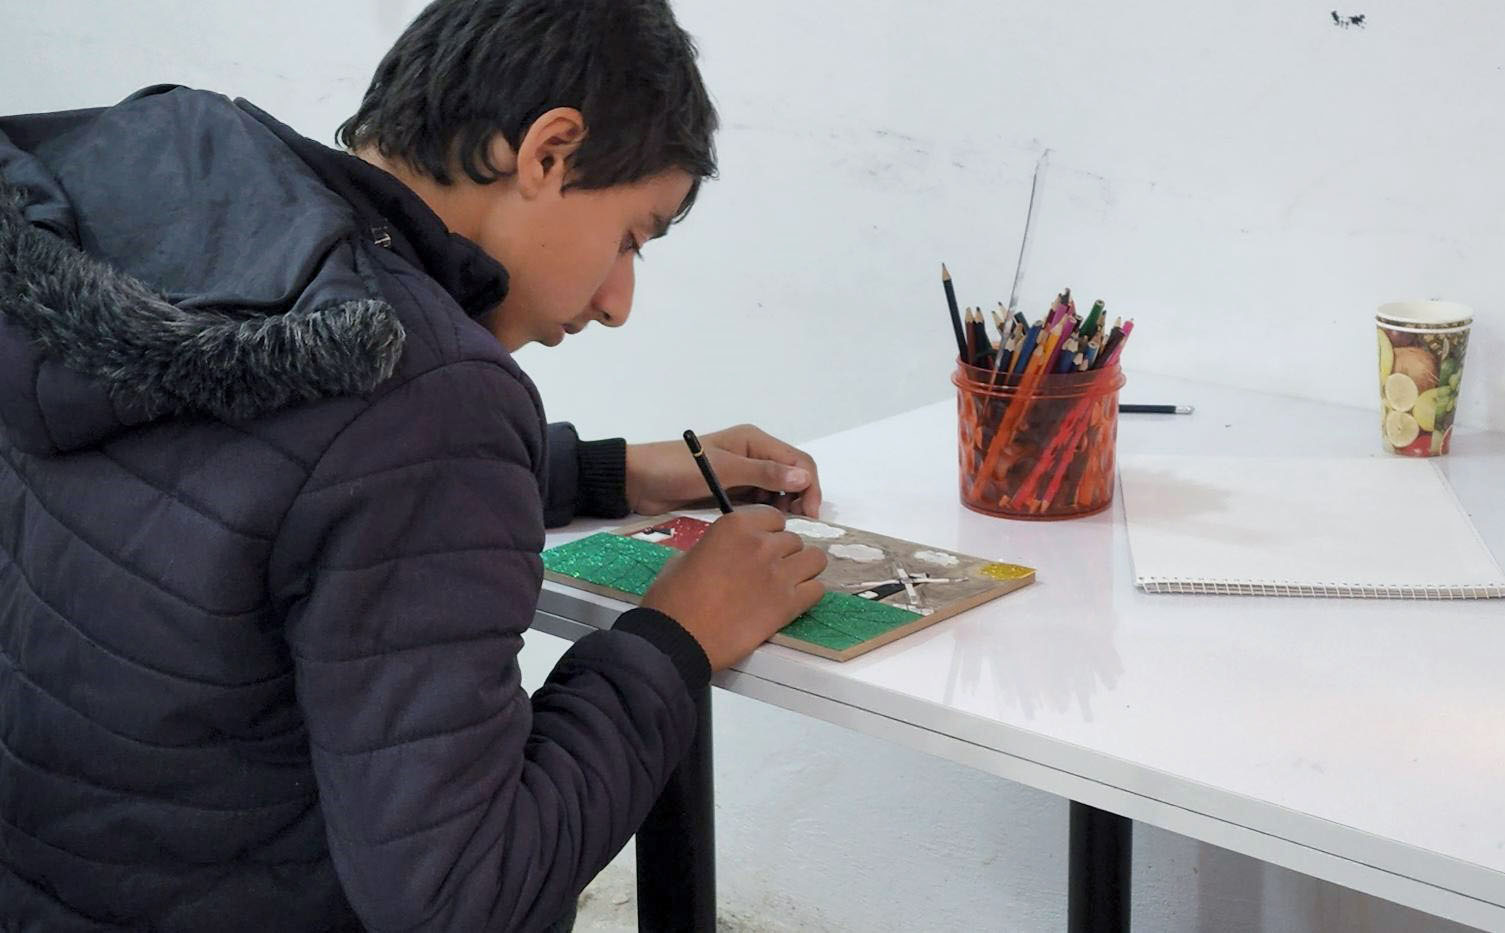 Art Workshops Inspire Hope for Camp Residents in Northeast Syria